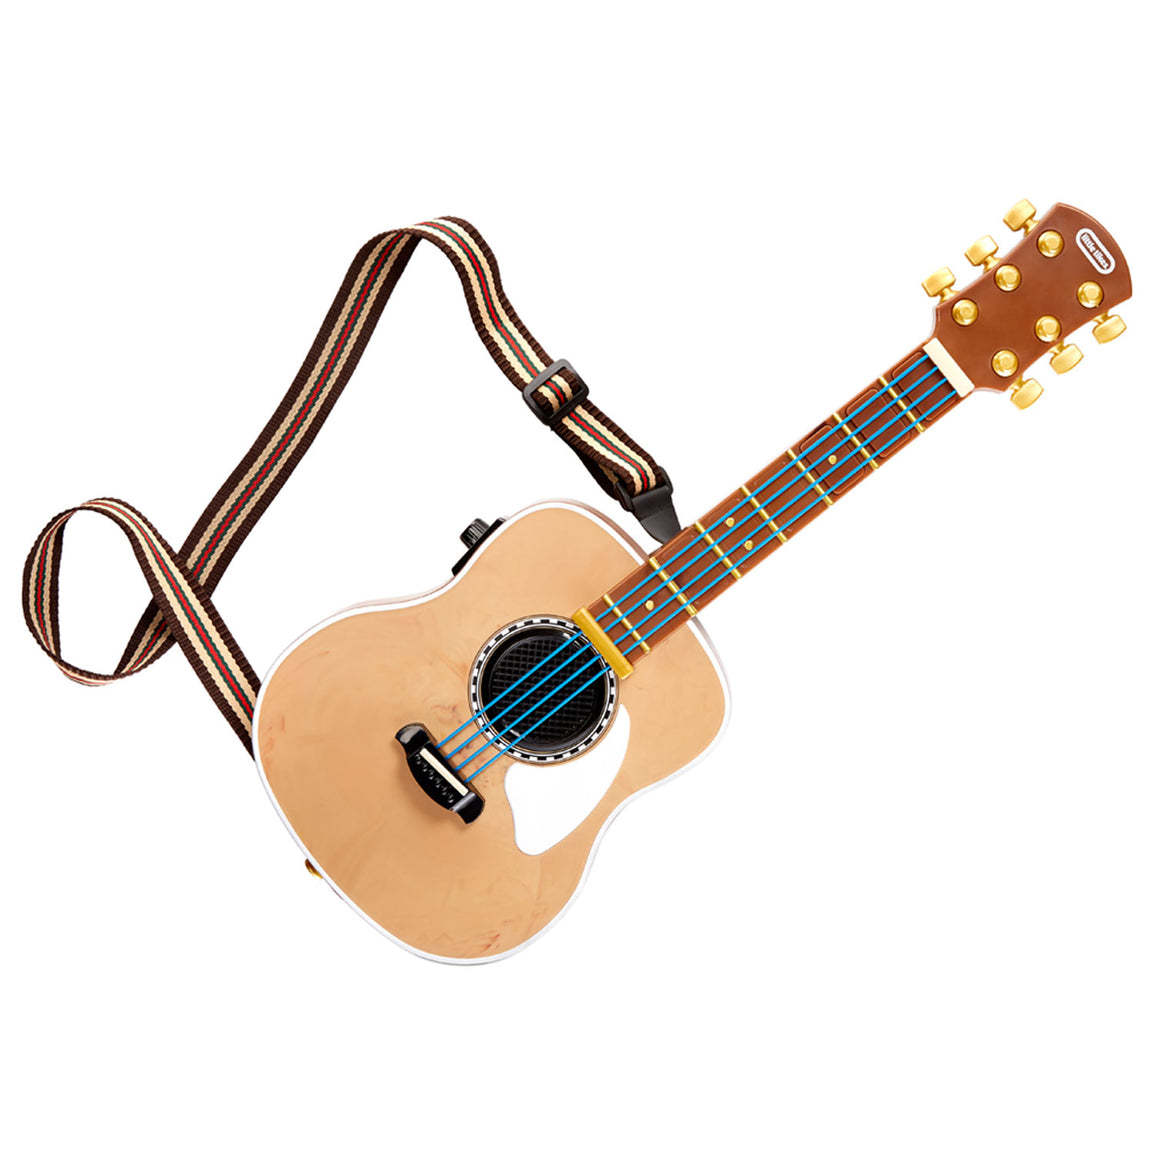 My Real Jam™ Acoustic Guitar - Official Little Tikes Website